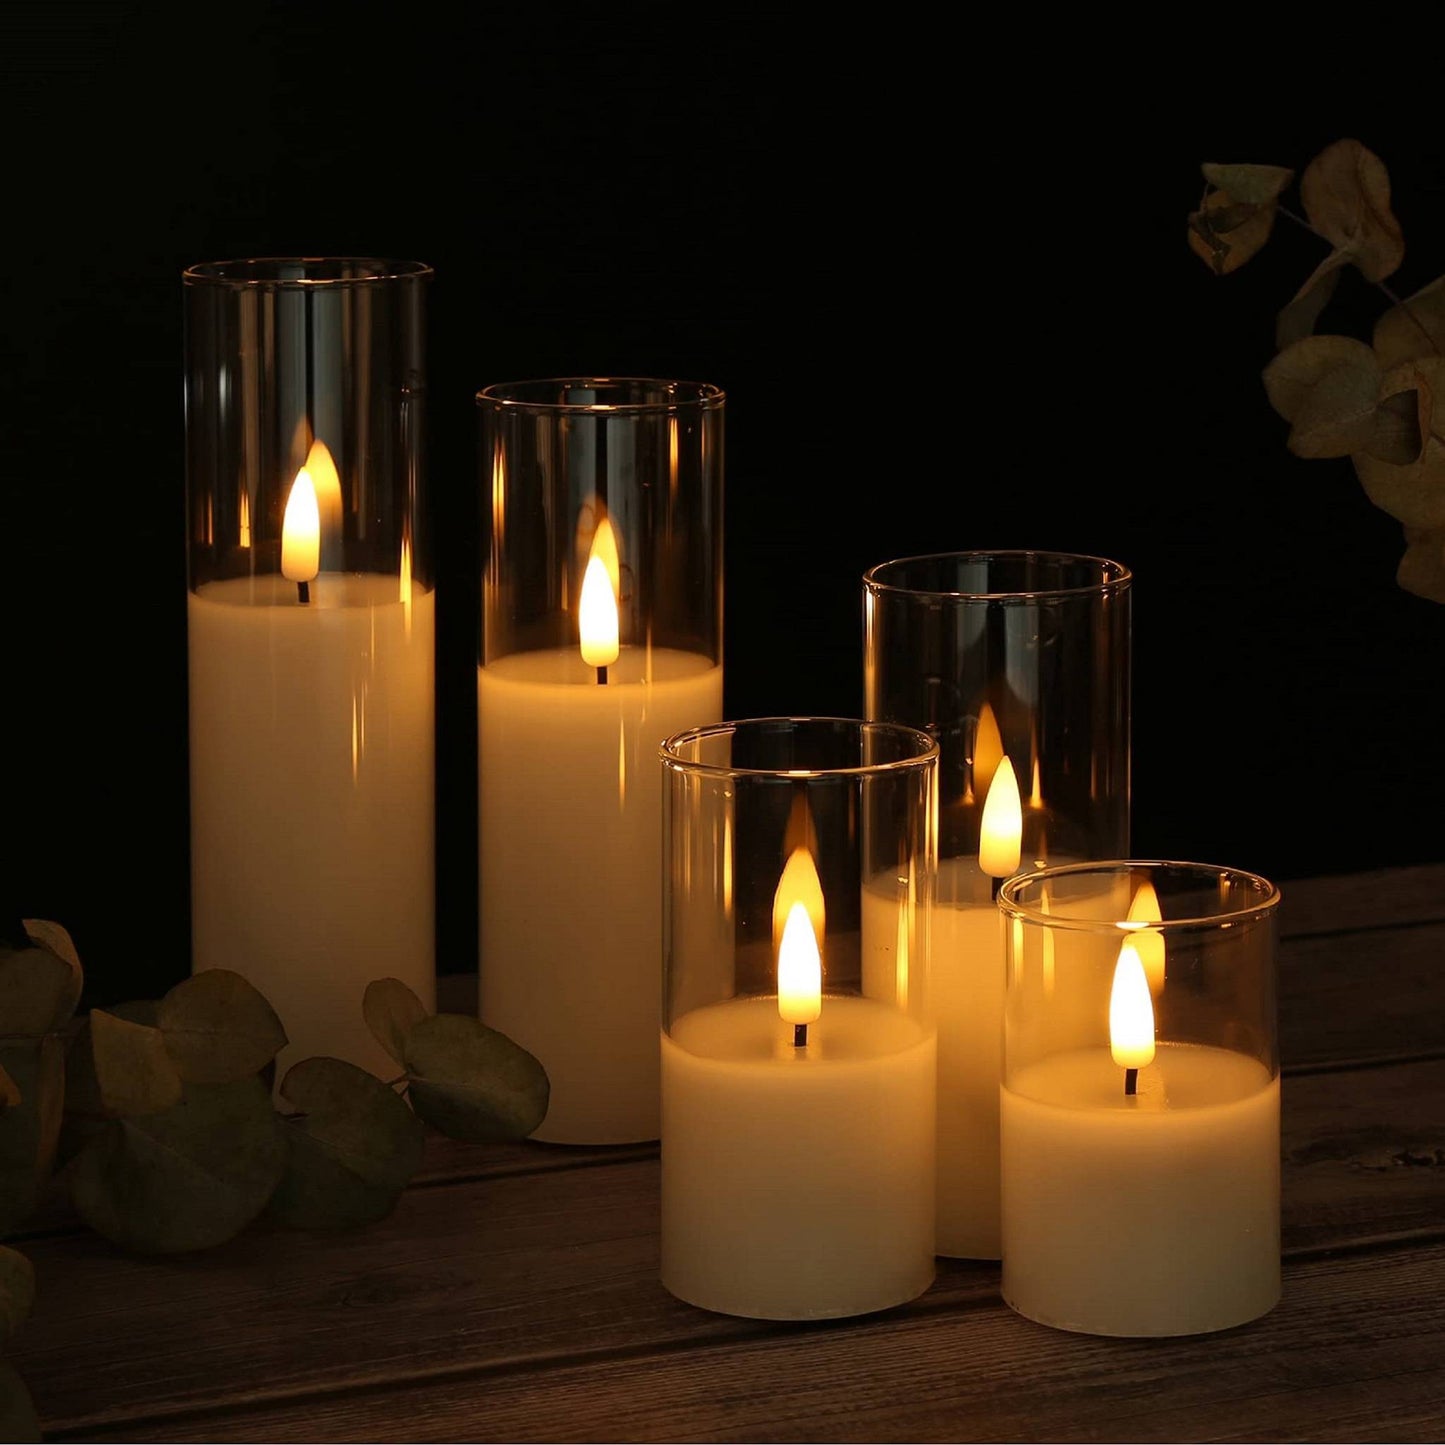 A set of five flameless clear glass candles of different lengths and some greenery on a table